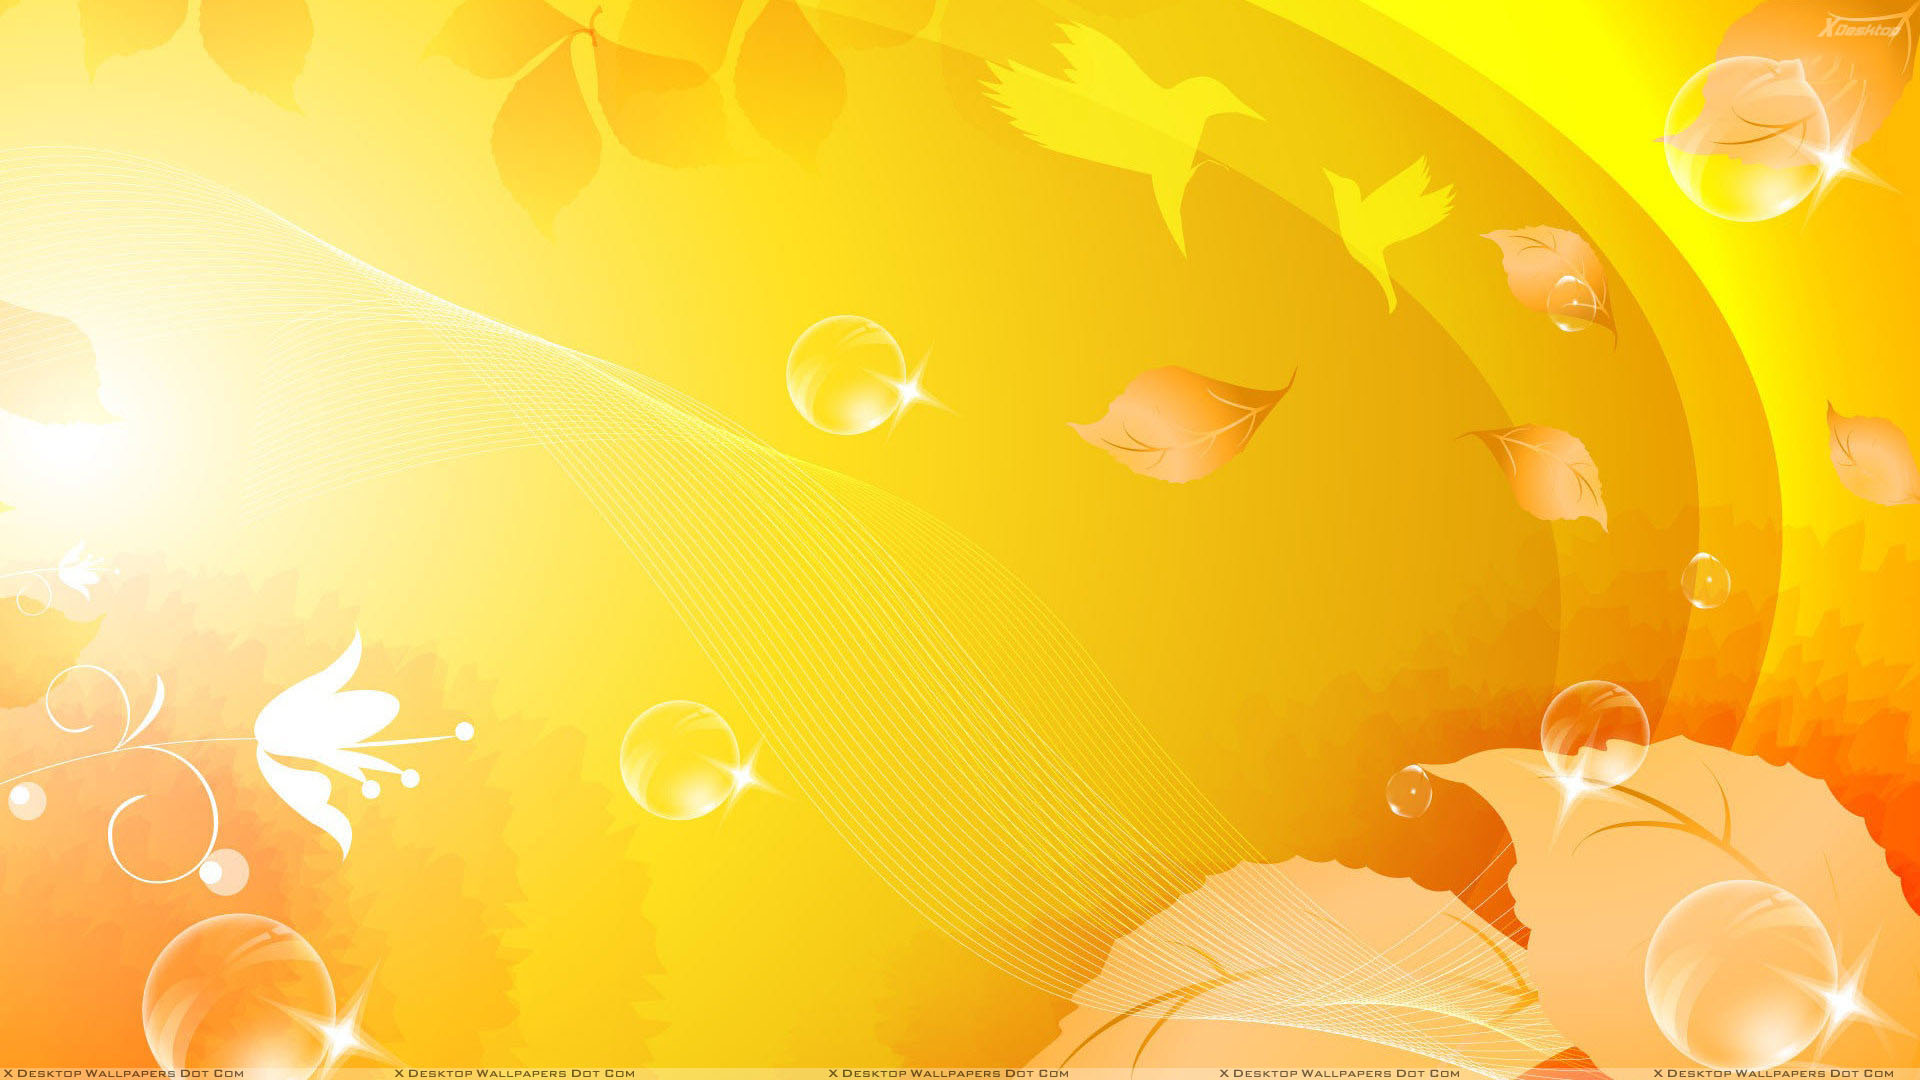  Yellow Wallpaper Sparknotes 14 High Resolution Wallpaper Full Size 1920x1080